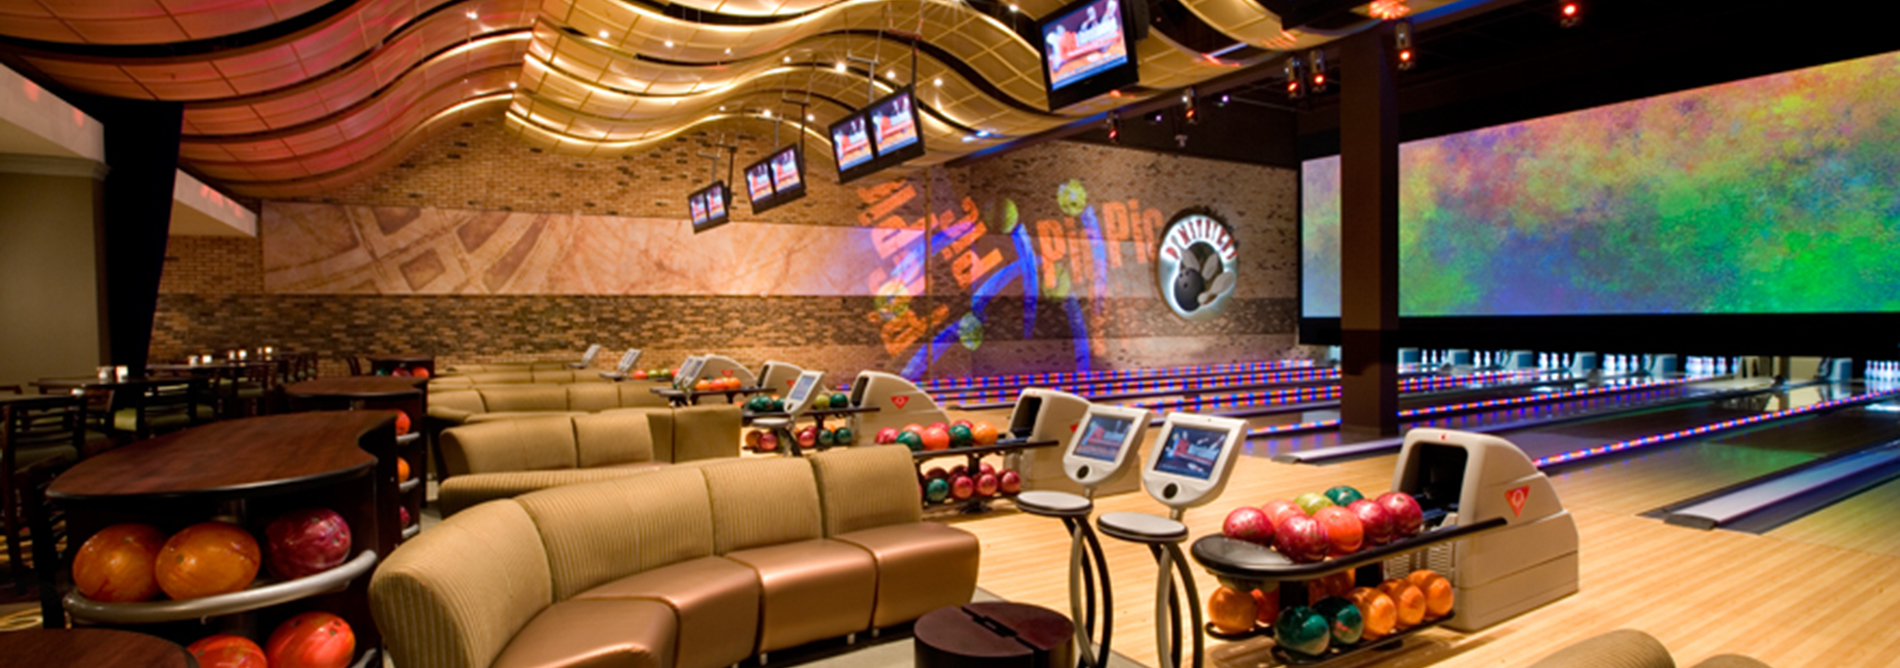 QUBICAAMF-bowling-boutique-IPIC-Entertainment-banner.jpg